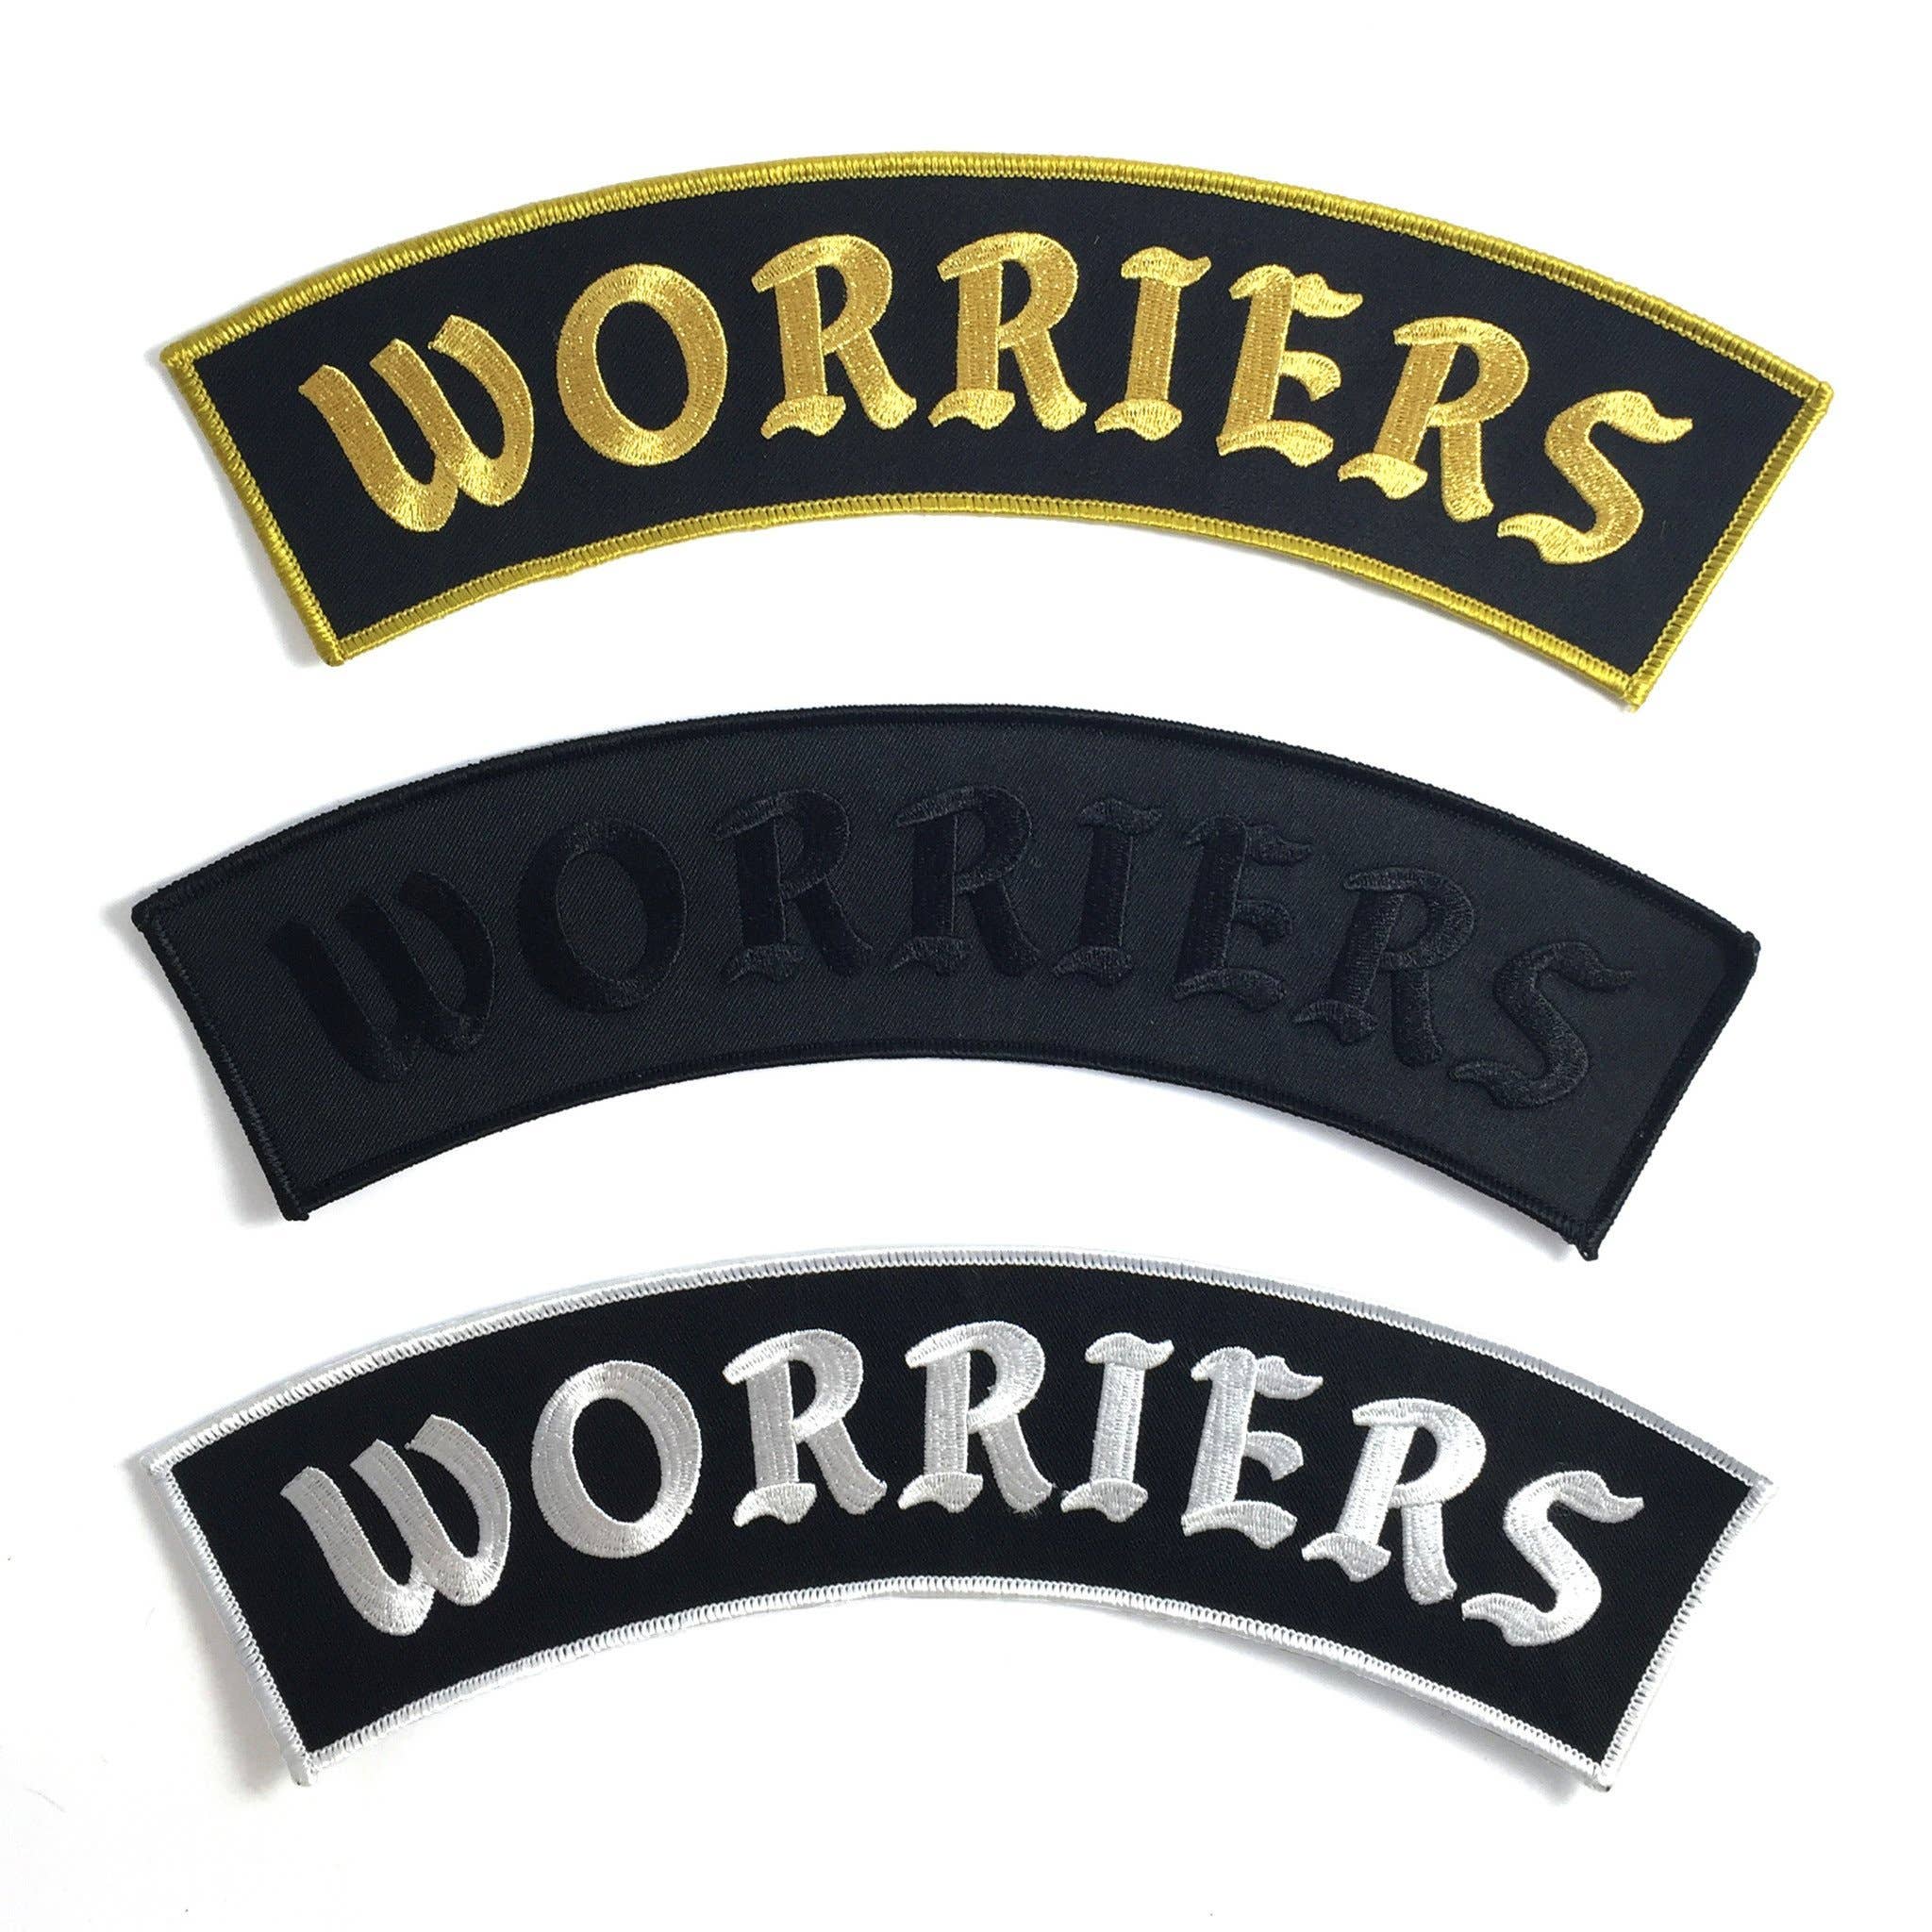 Worriers Anxiety Club - Back Patches: Rocker / Skull Set - White